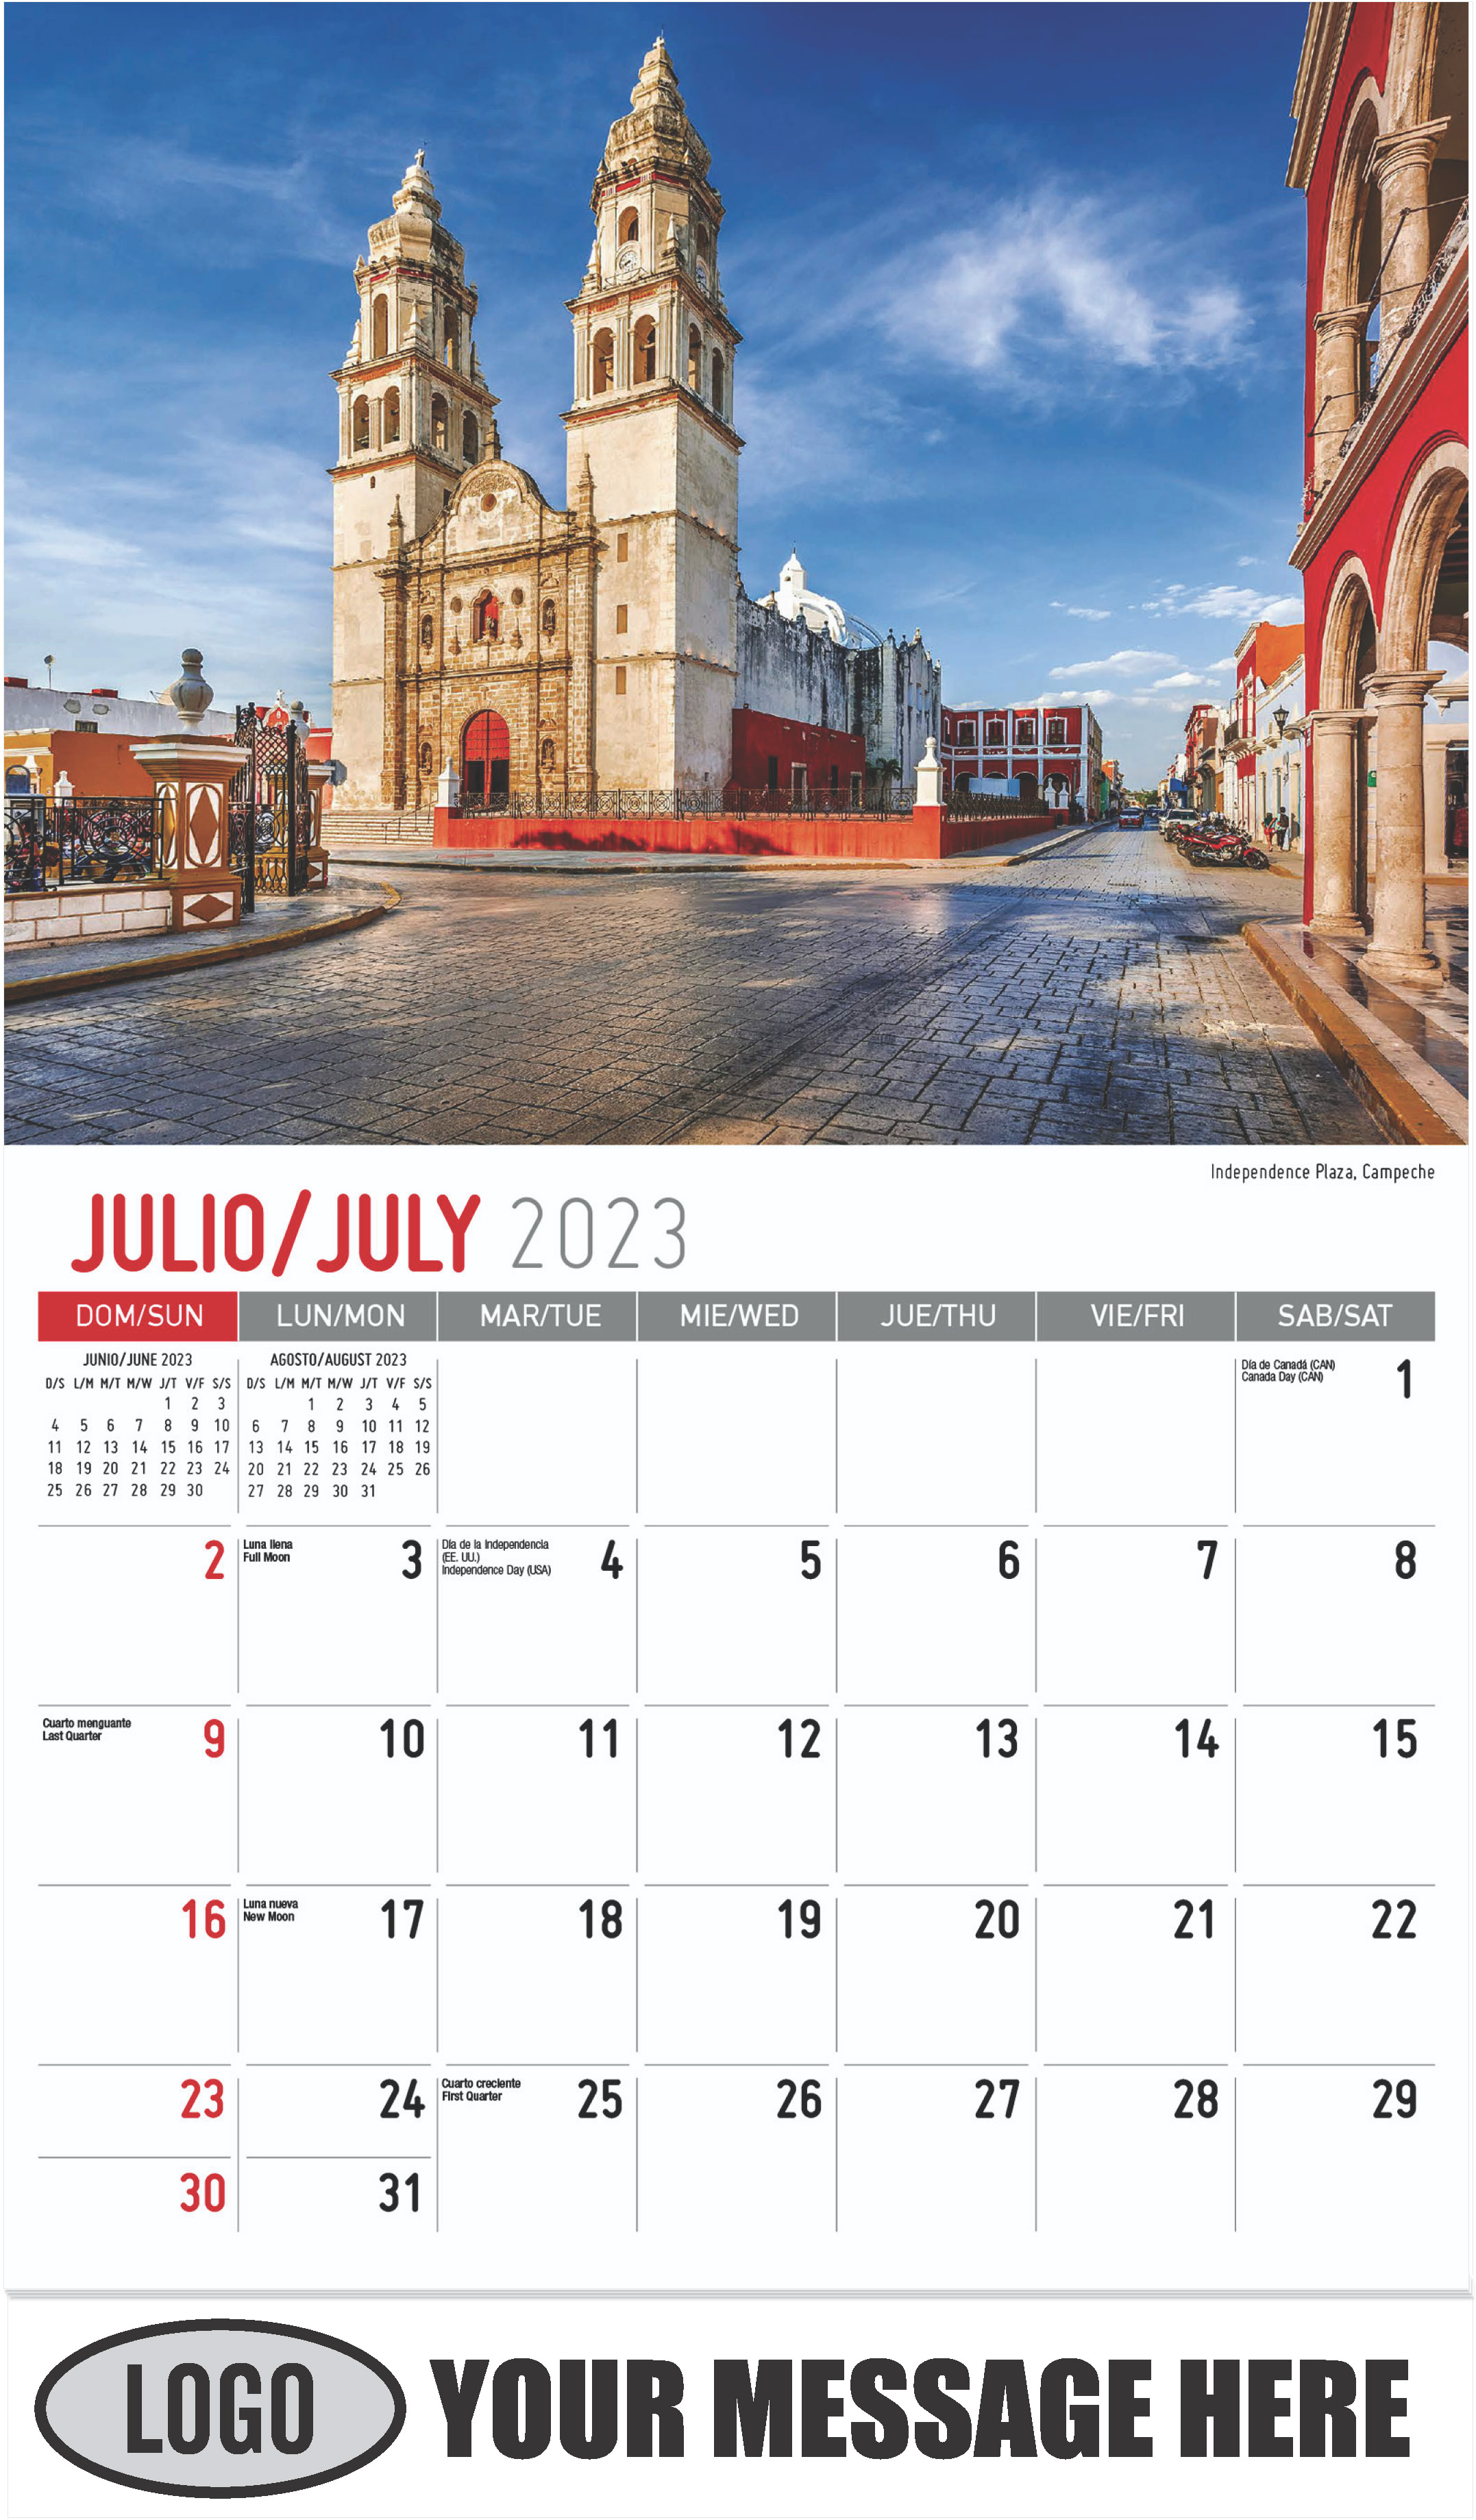 Independence Plaza, Campeche - July - Scenes of Mexico (Spanish-English bilingual) 2023 Promotional Calendar